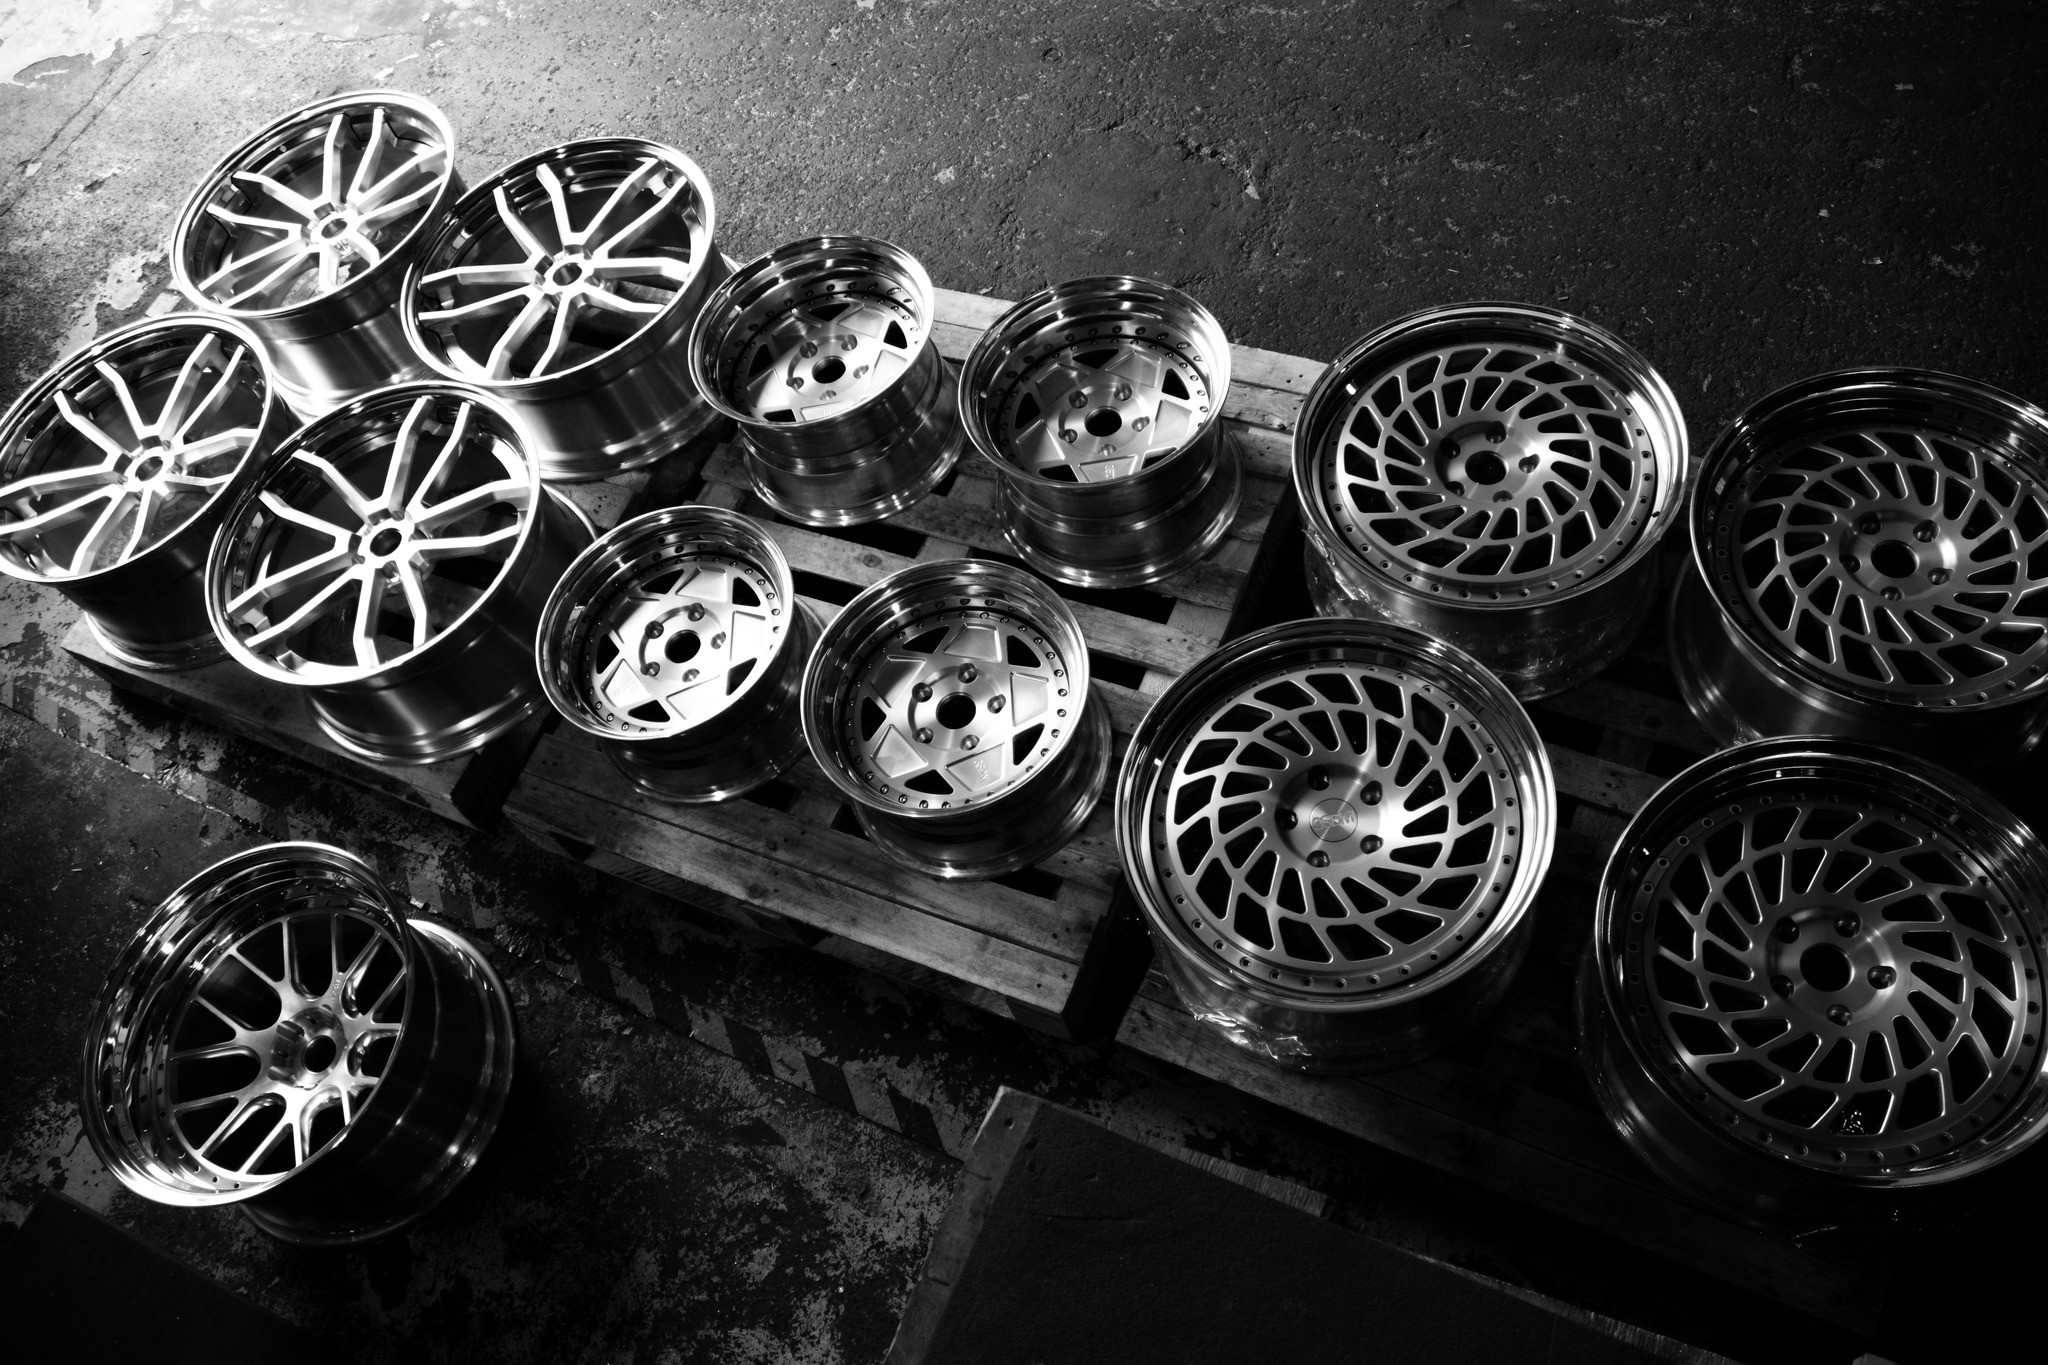 3SDM Forged - Proudly made in-house here in t | CyAuWI0CLiE